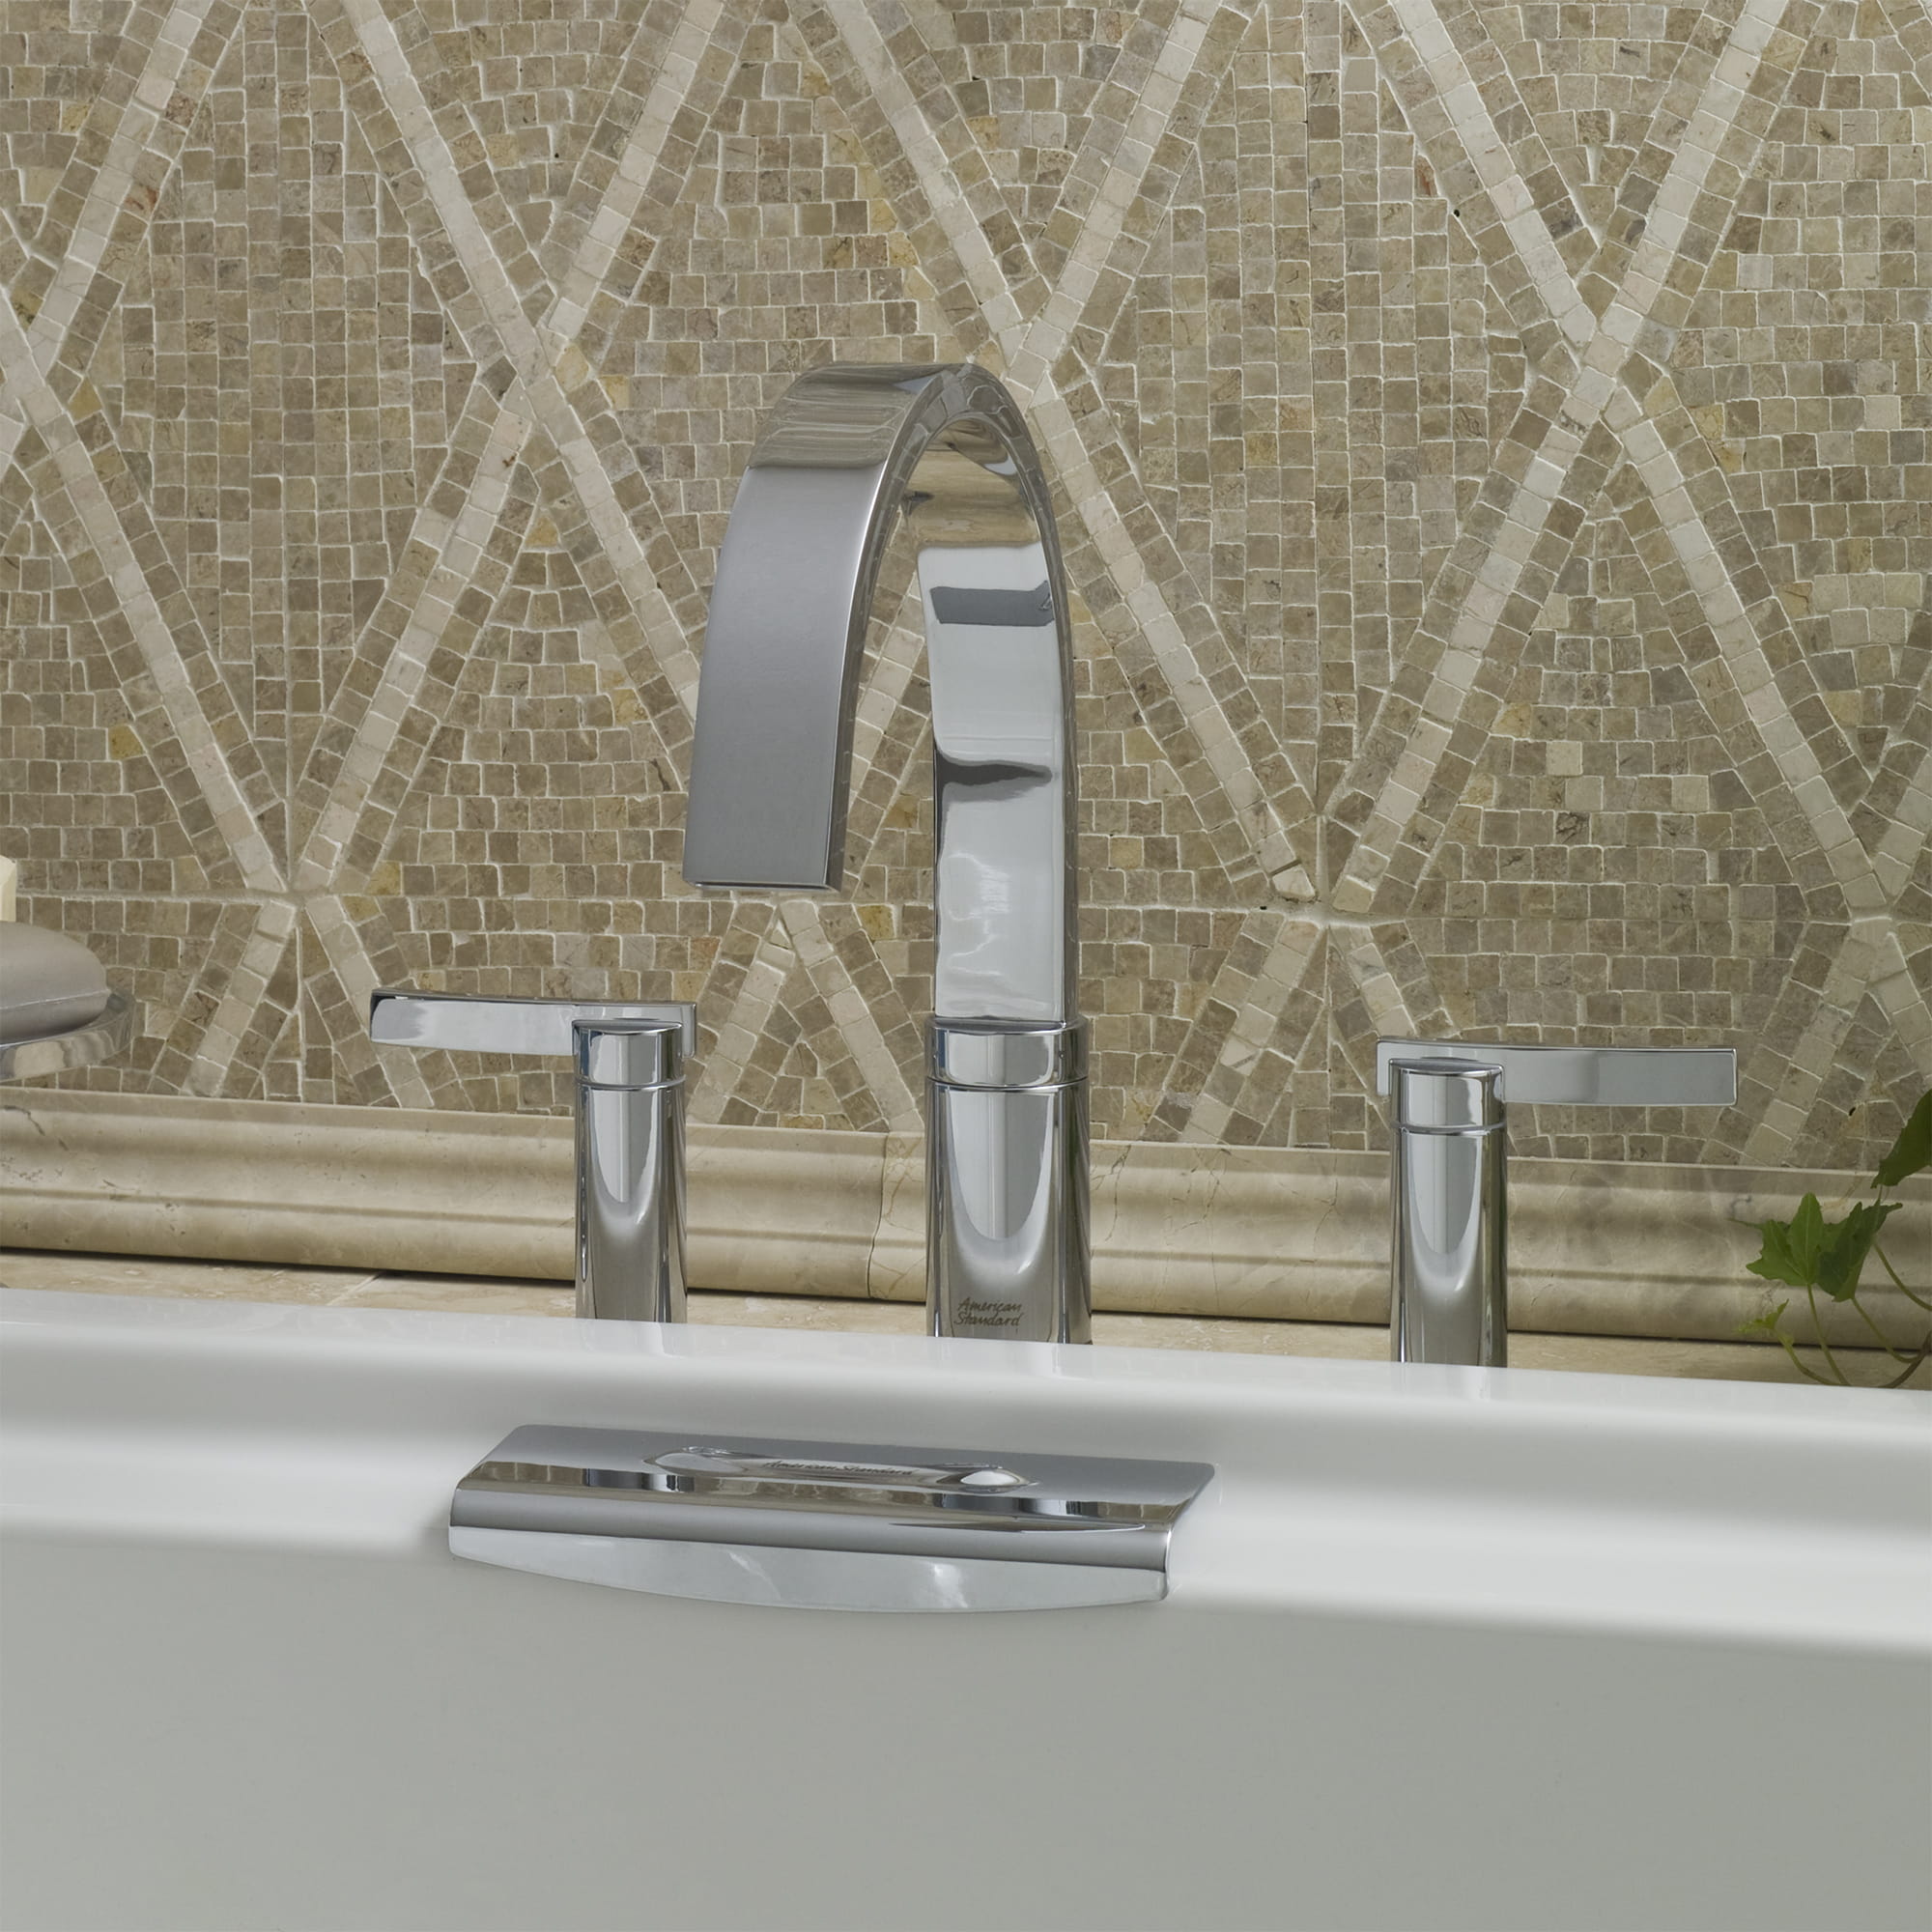 Berwick Bathtub Faucet With Personal Shower for Flash Rough In Valve With Lever Handles CHROME